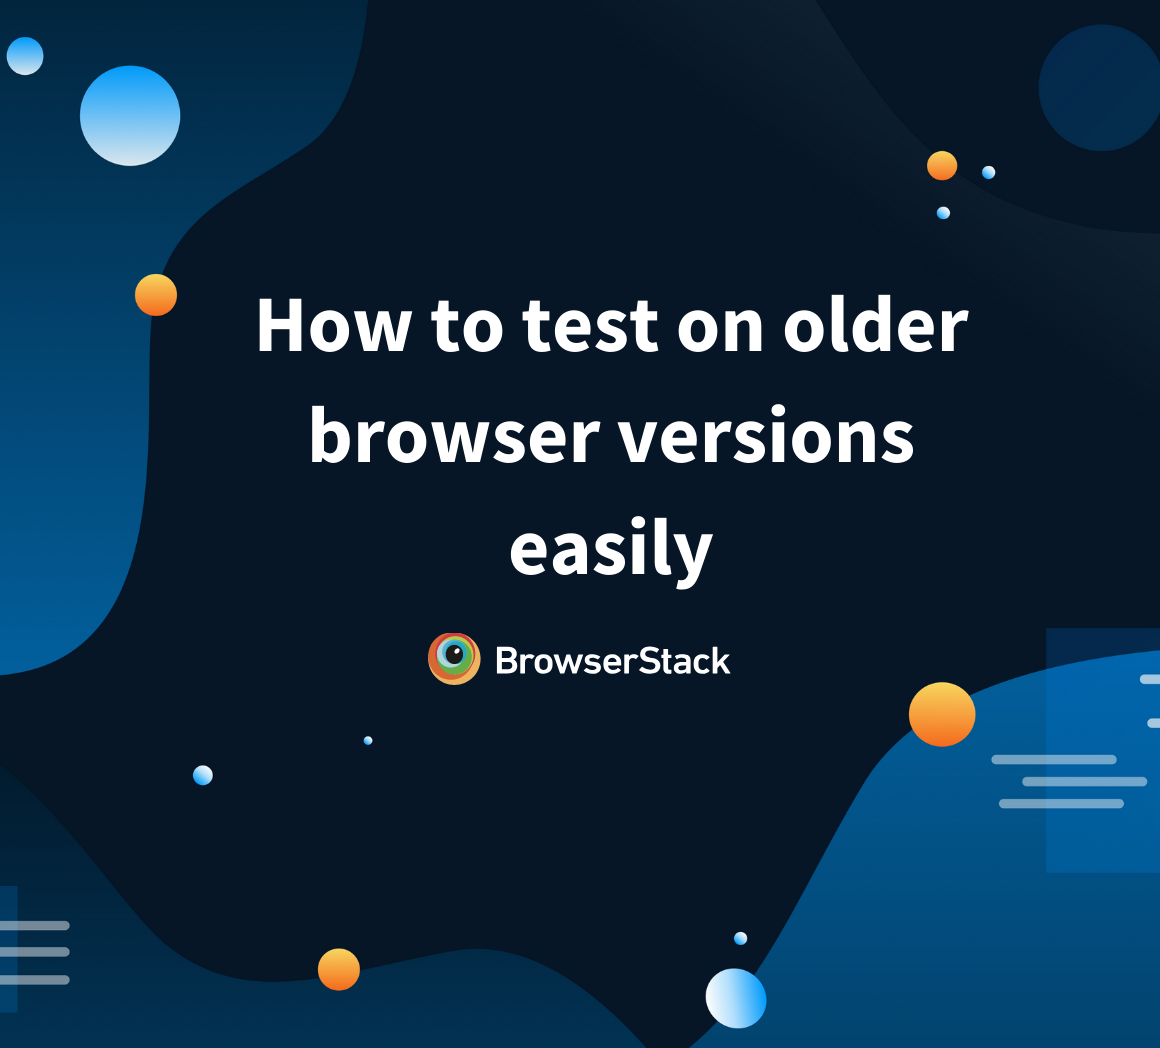 How to test on older browser versions